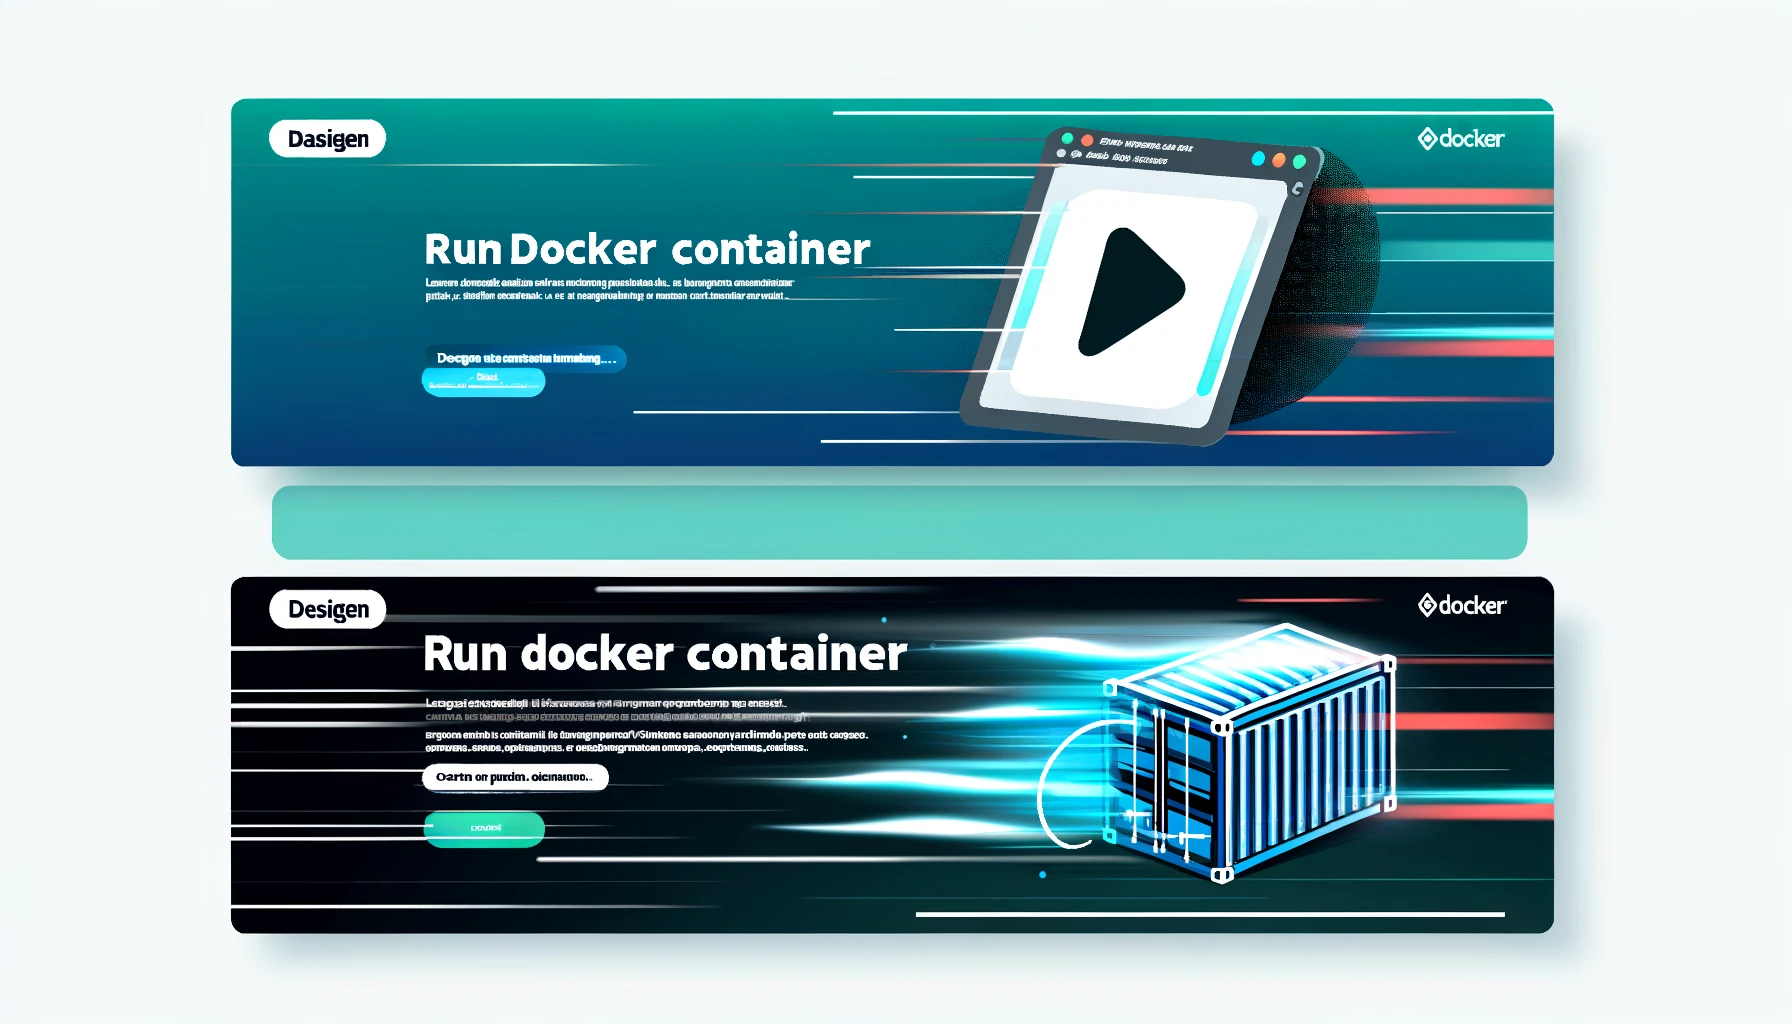 Lesson 4 - Chạy Container trong Docker